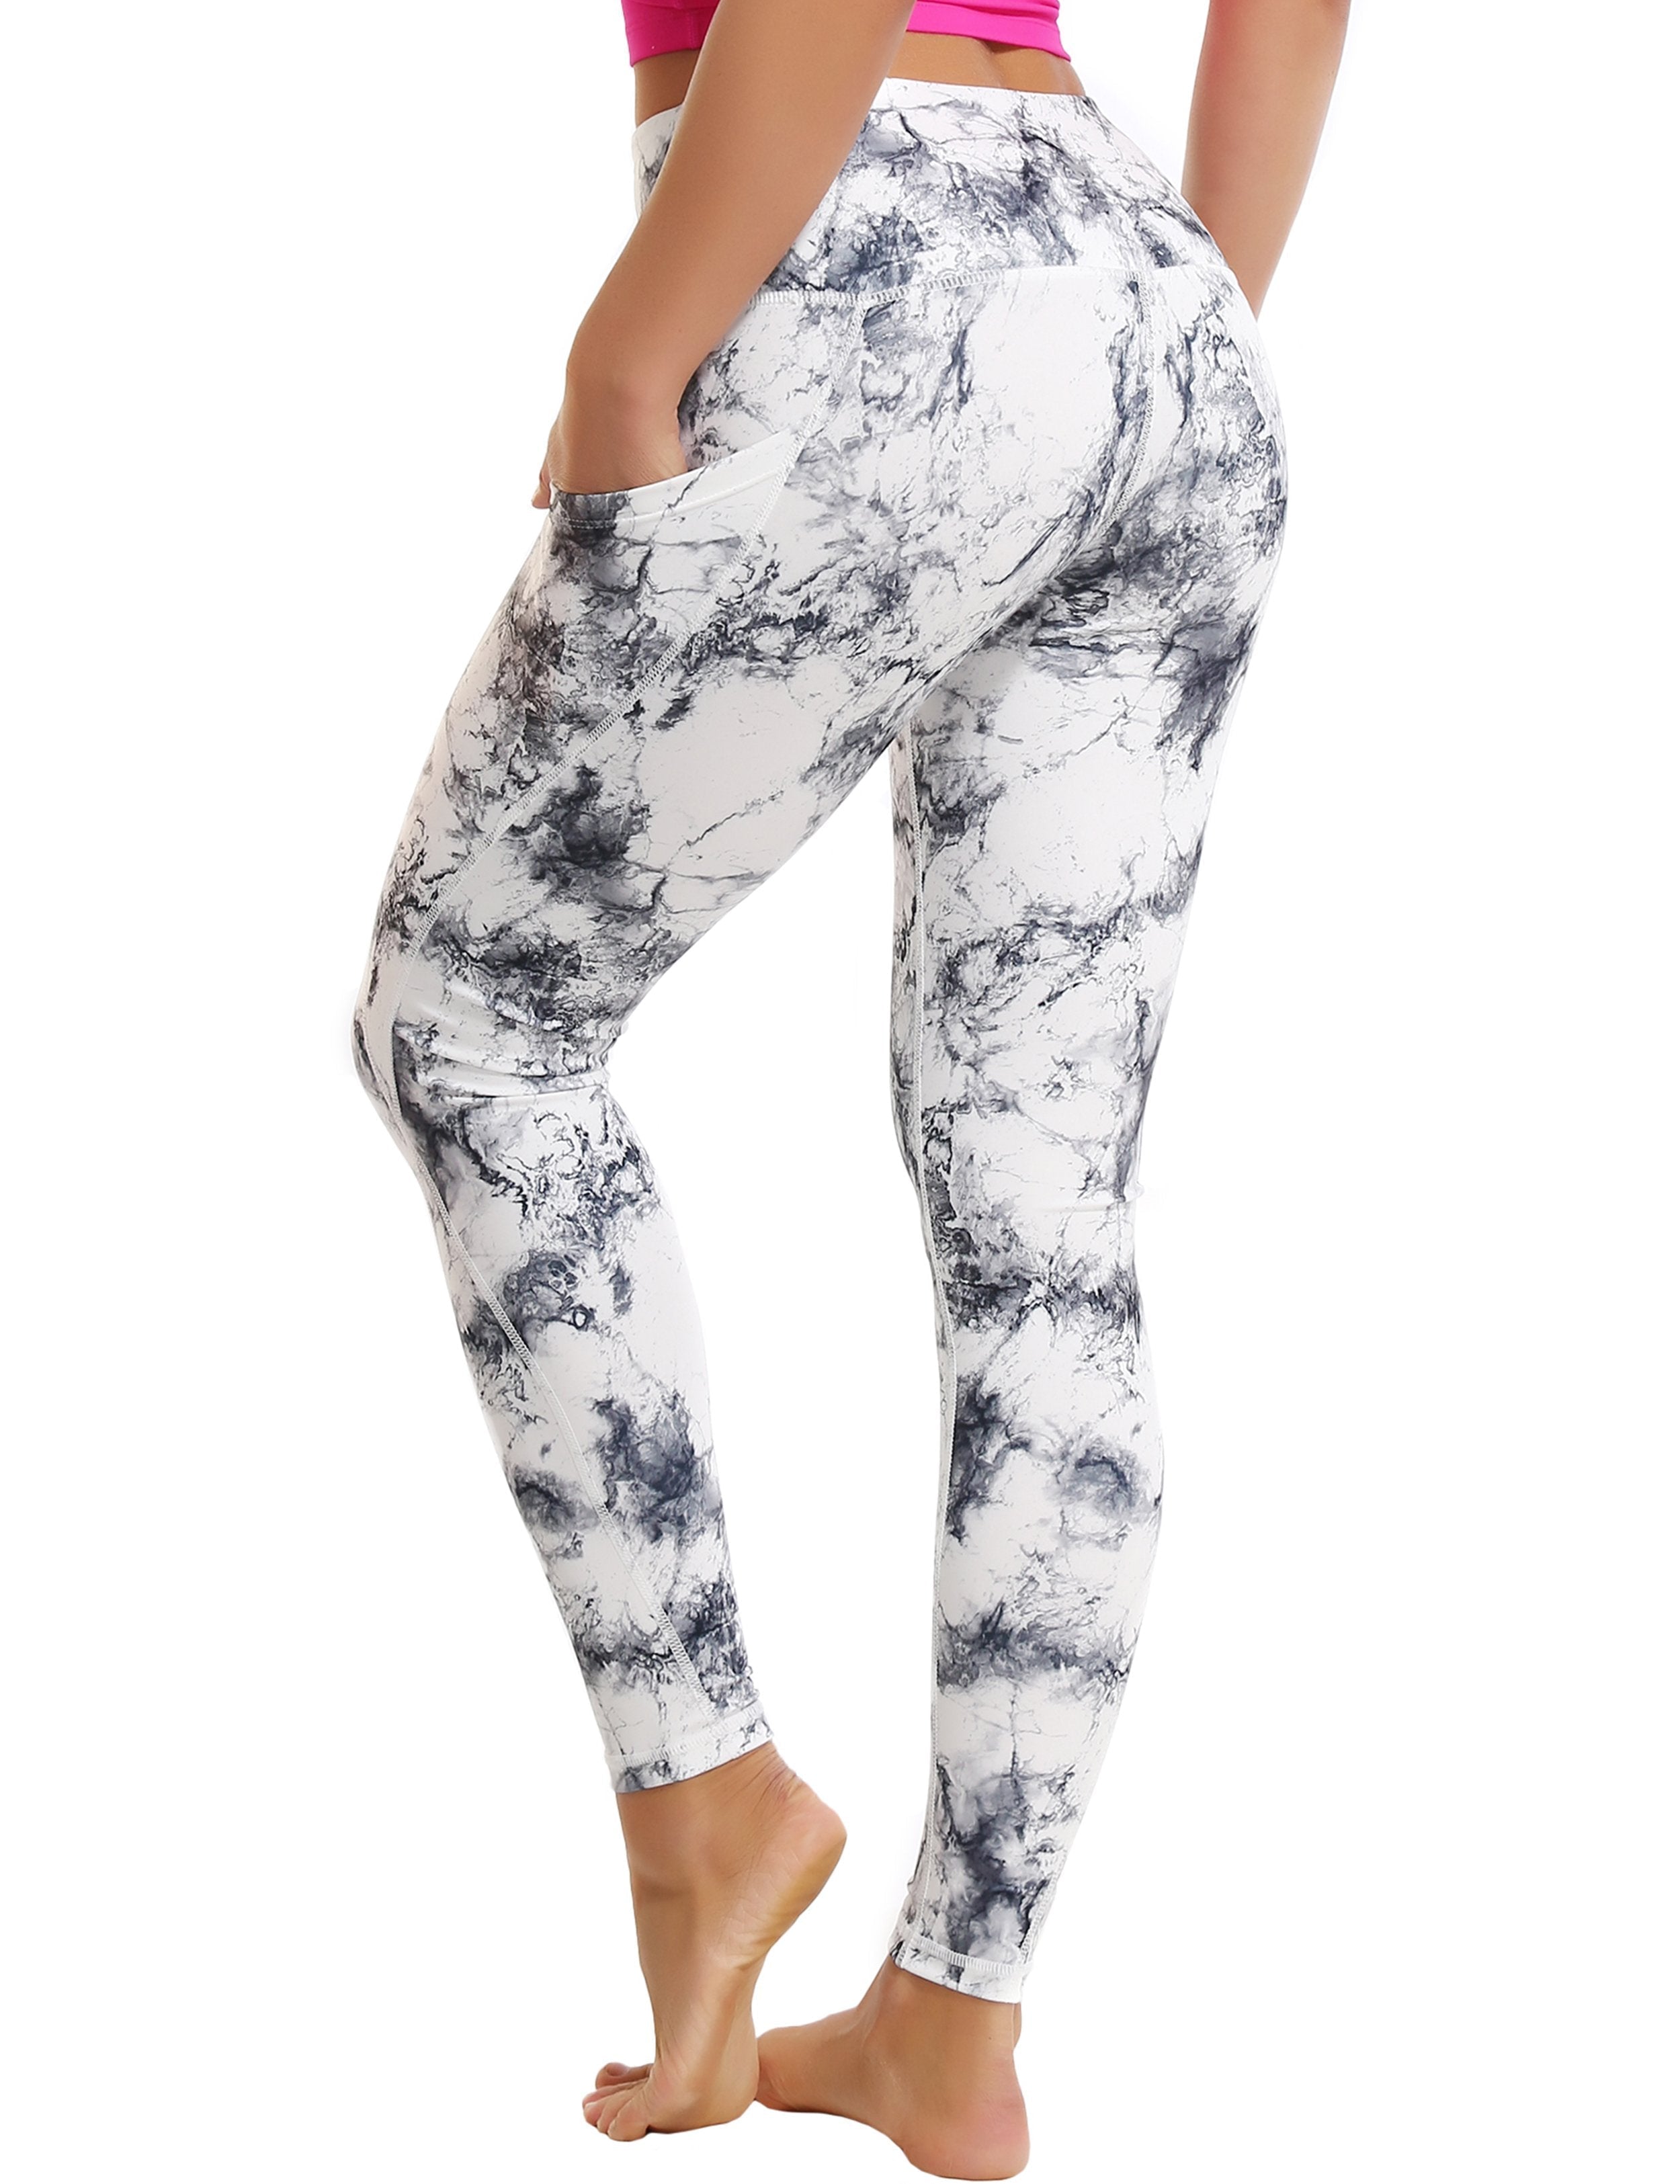 High Waist Side Pockets Tall Size Pants arabescato 78%Polyester/22%Spandex Fabric doesn't attract lint easily 4-way stretch No see-through Moisture-wicking Tummy control Inner pocket